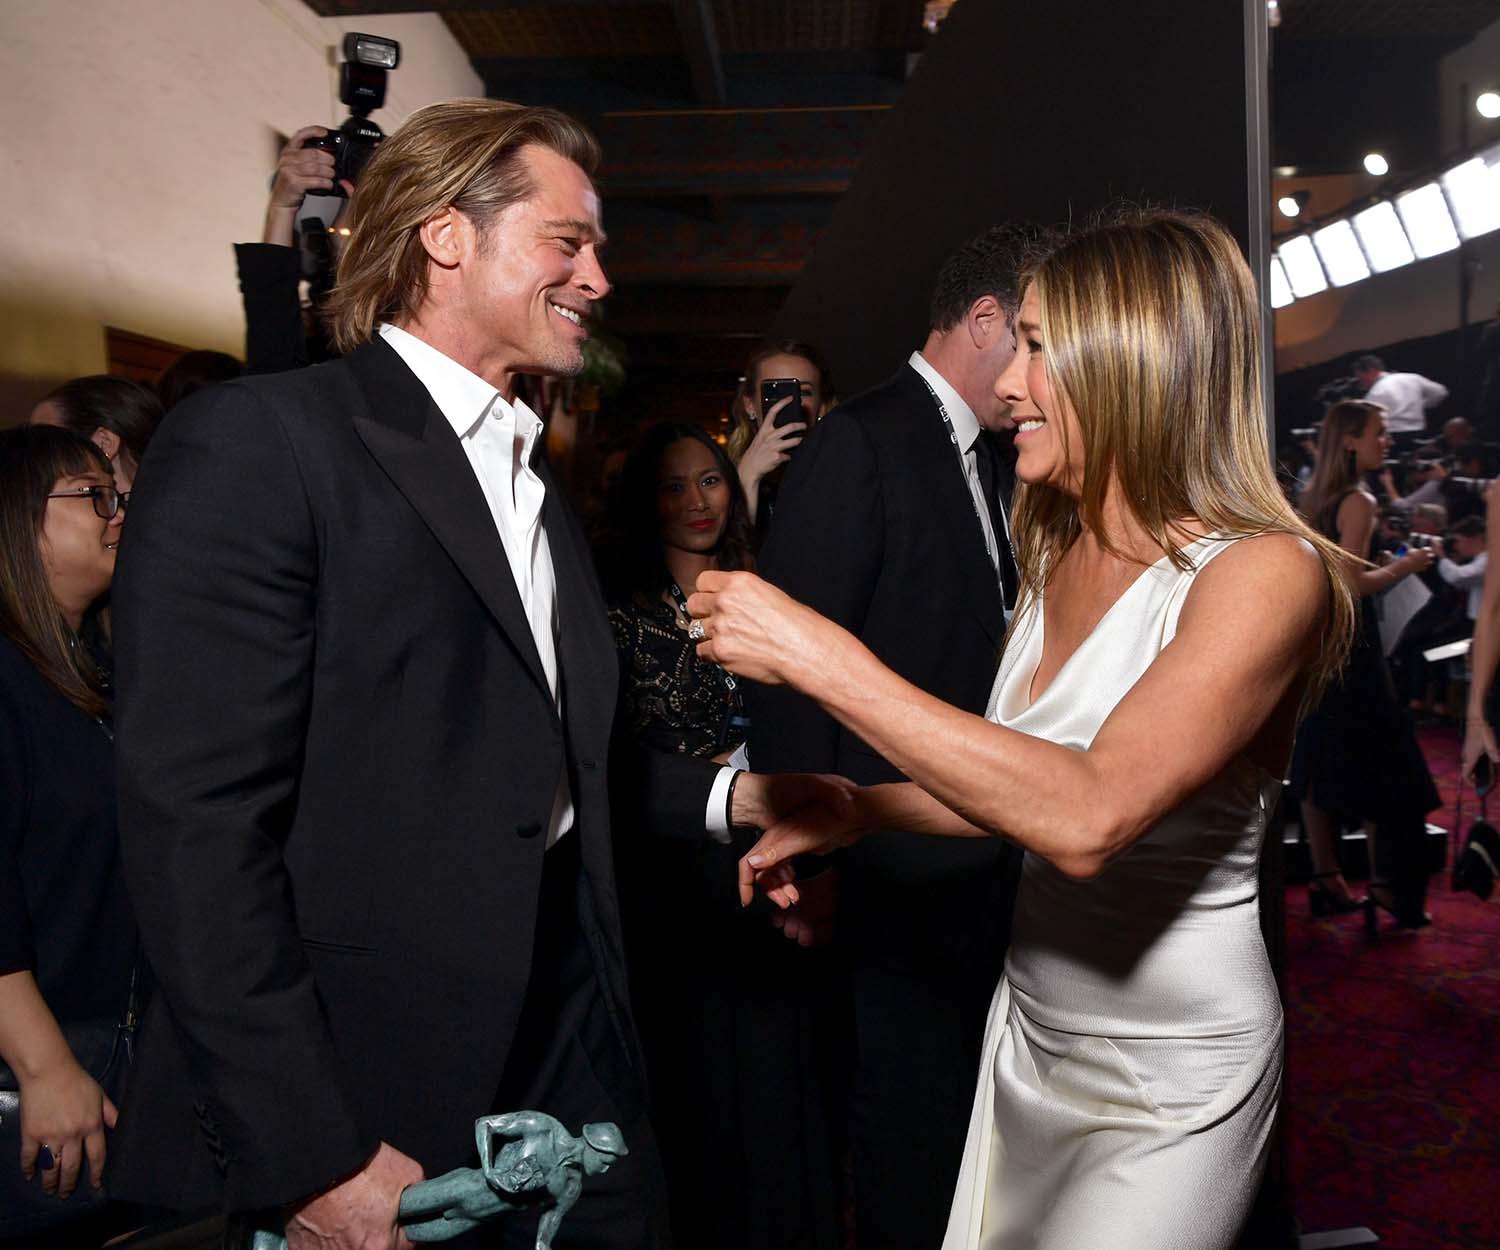 Will Brad Pitt and Jen Aniston get back together? We asked a body language expert to analyse their interactions